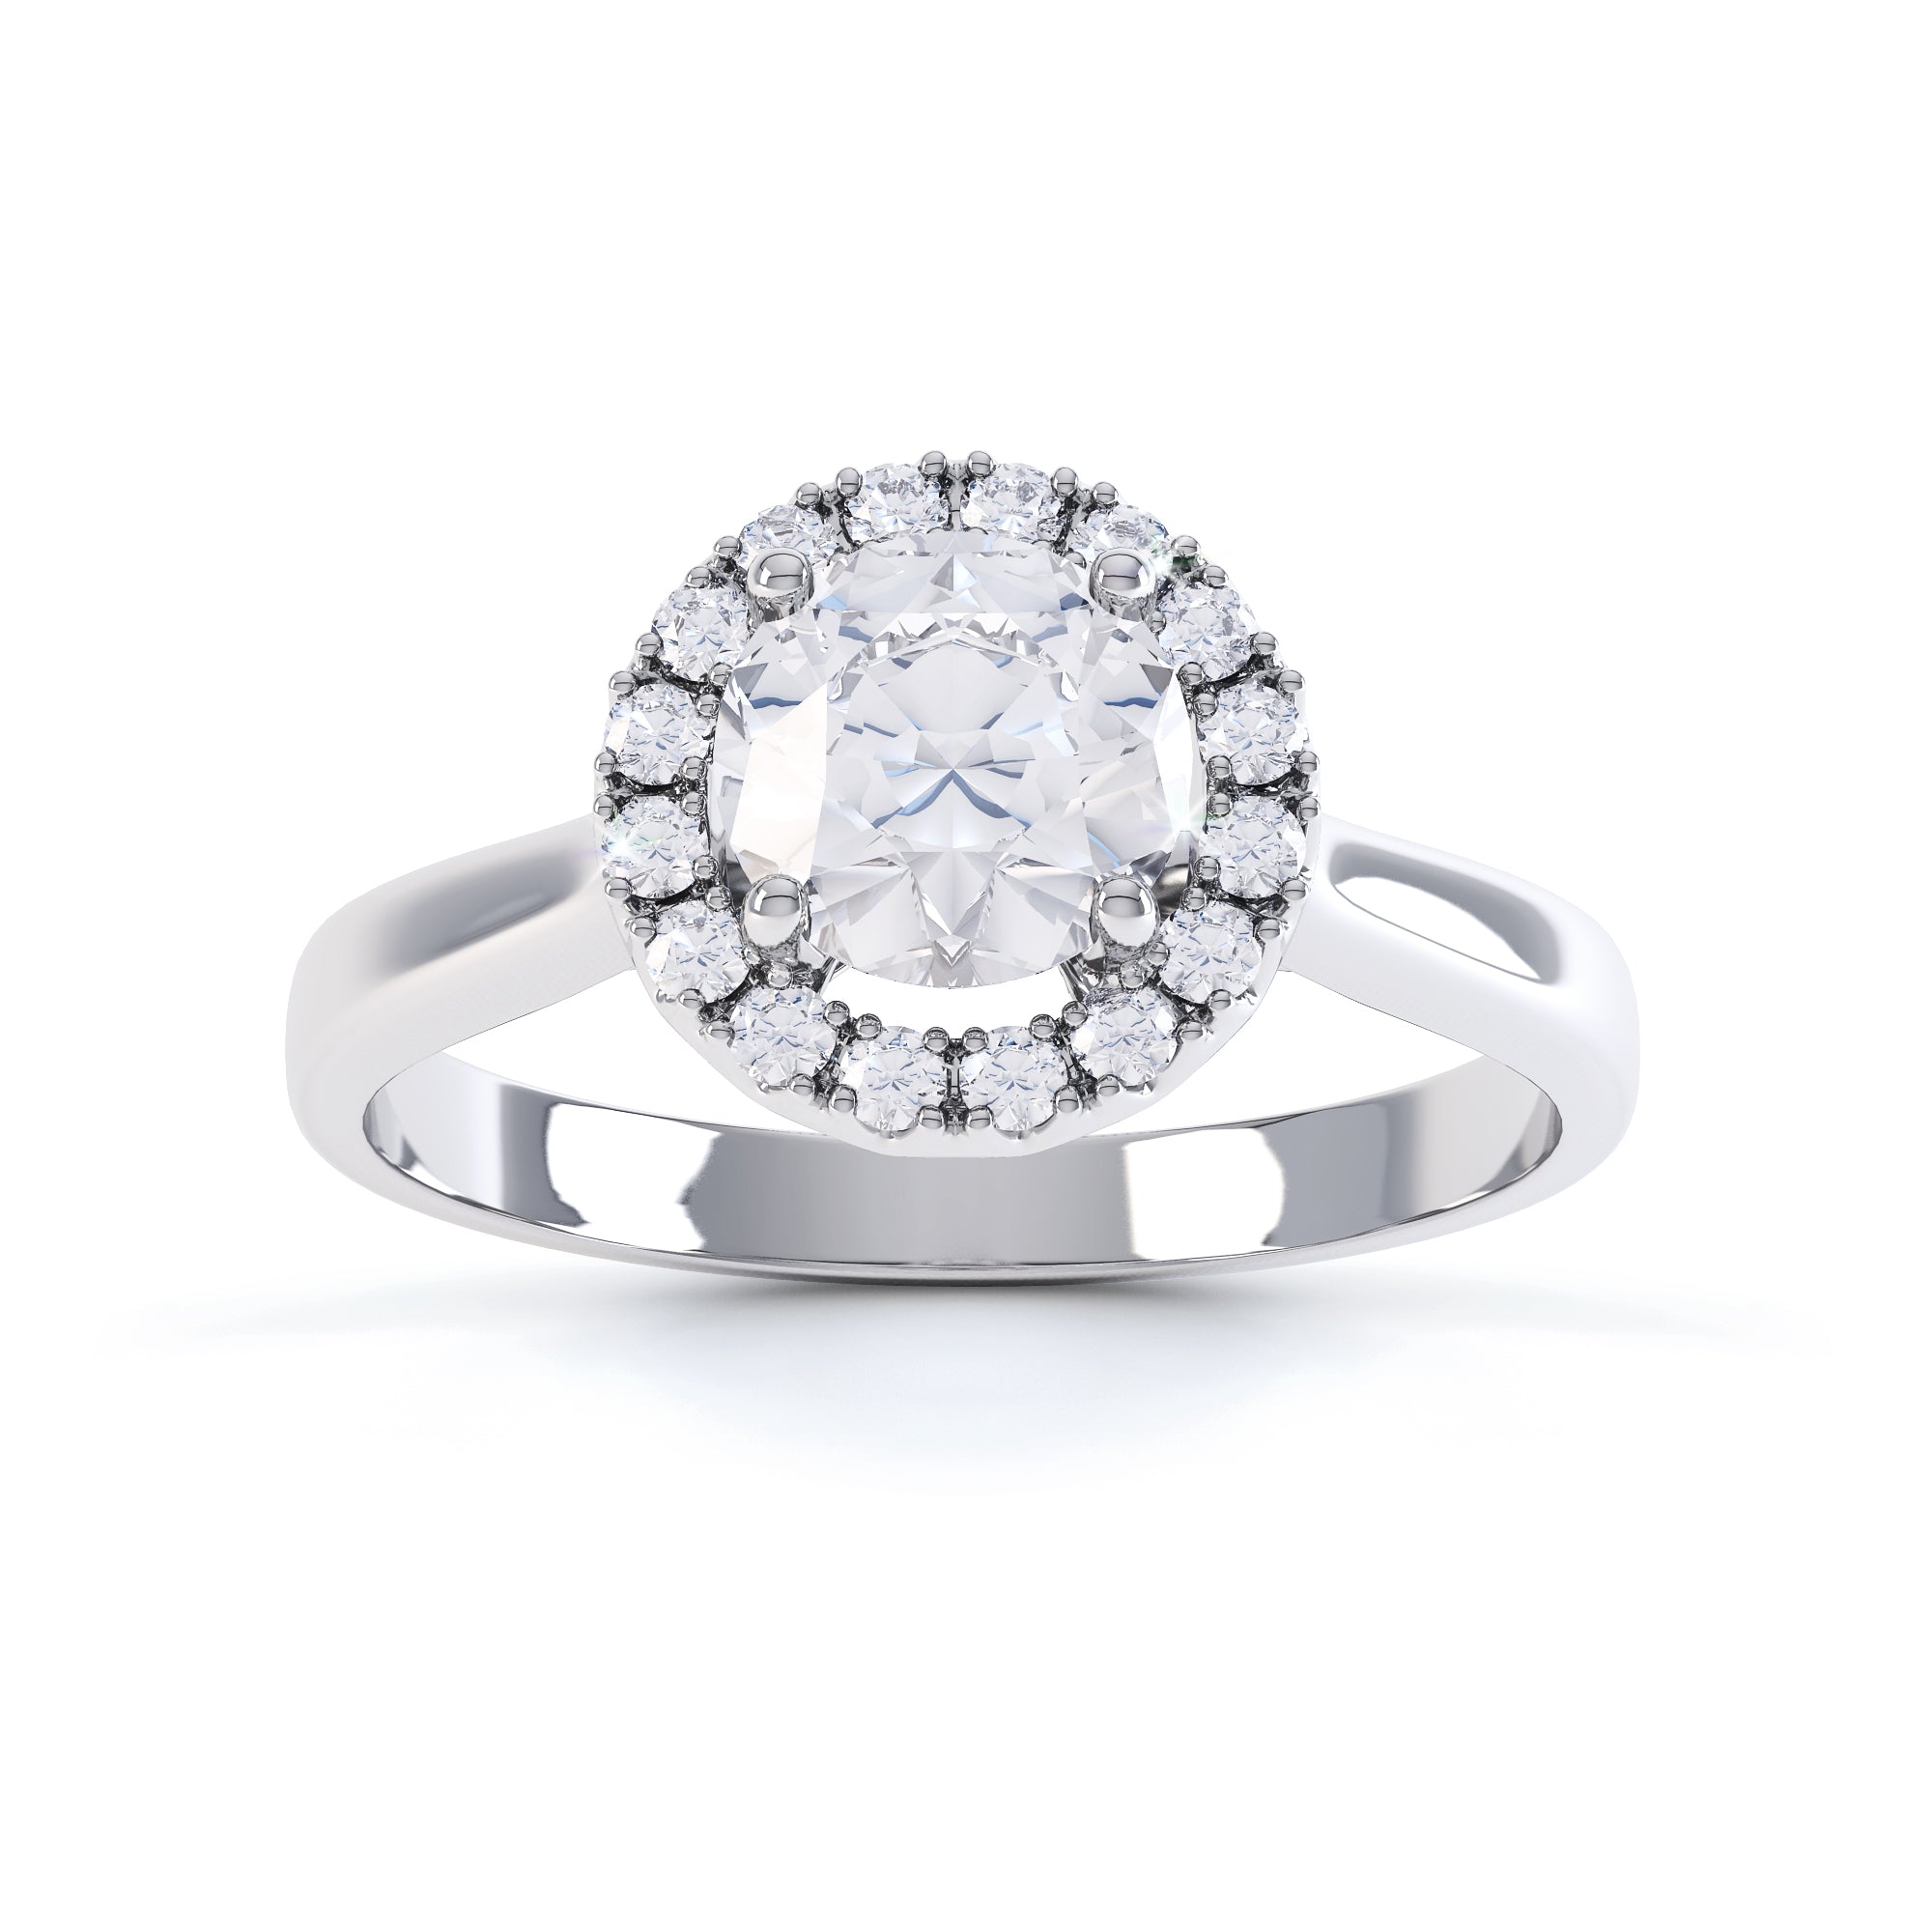 Round Brilliant Cut Centre Stone, Four Claw, Halo, Diamond Engagement Ring